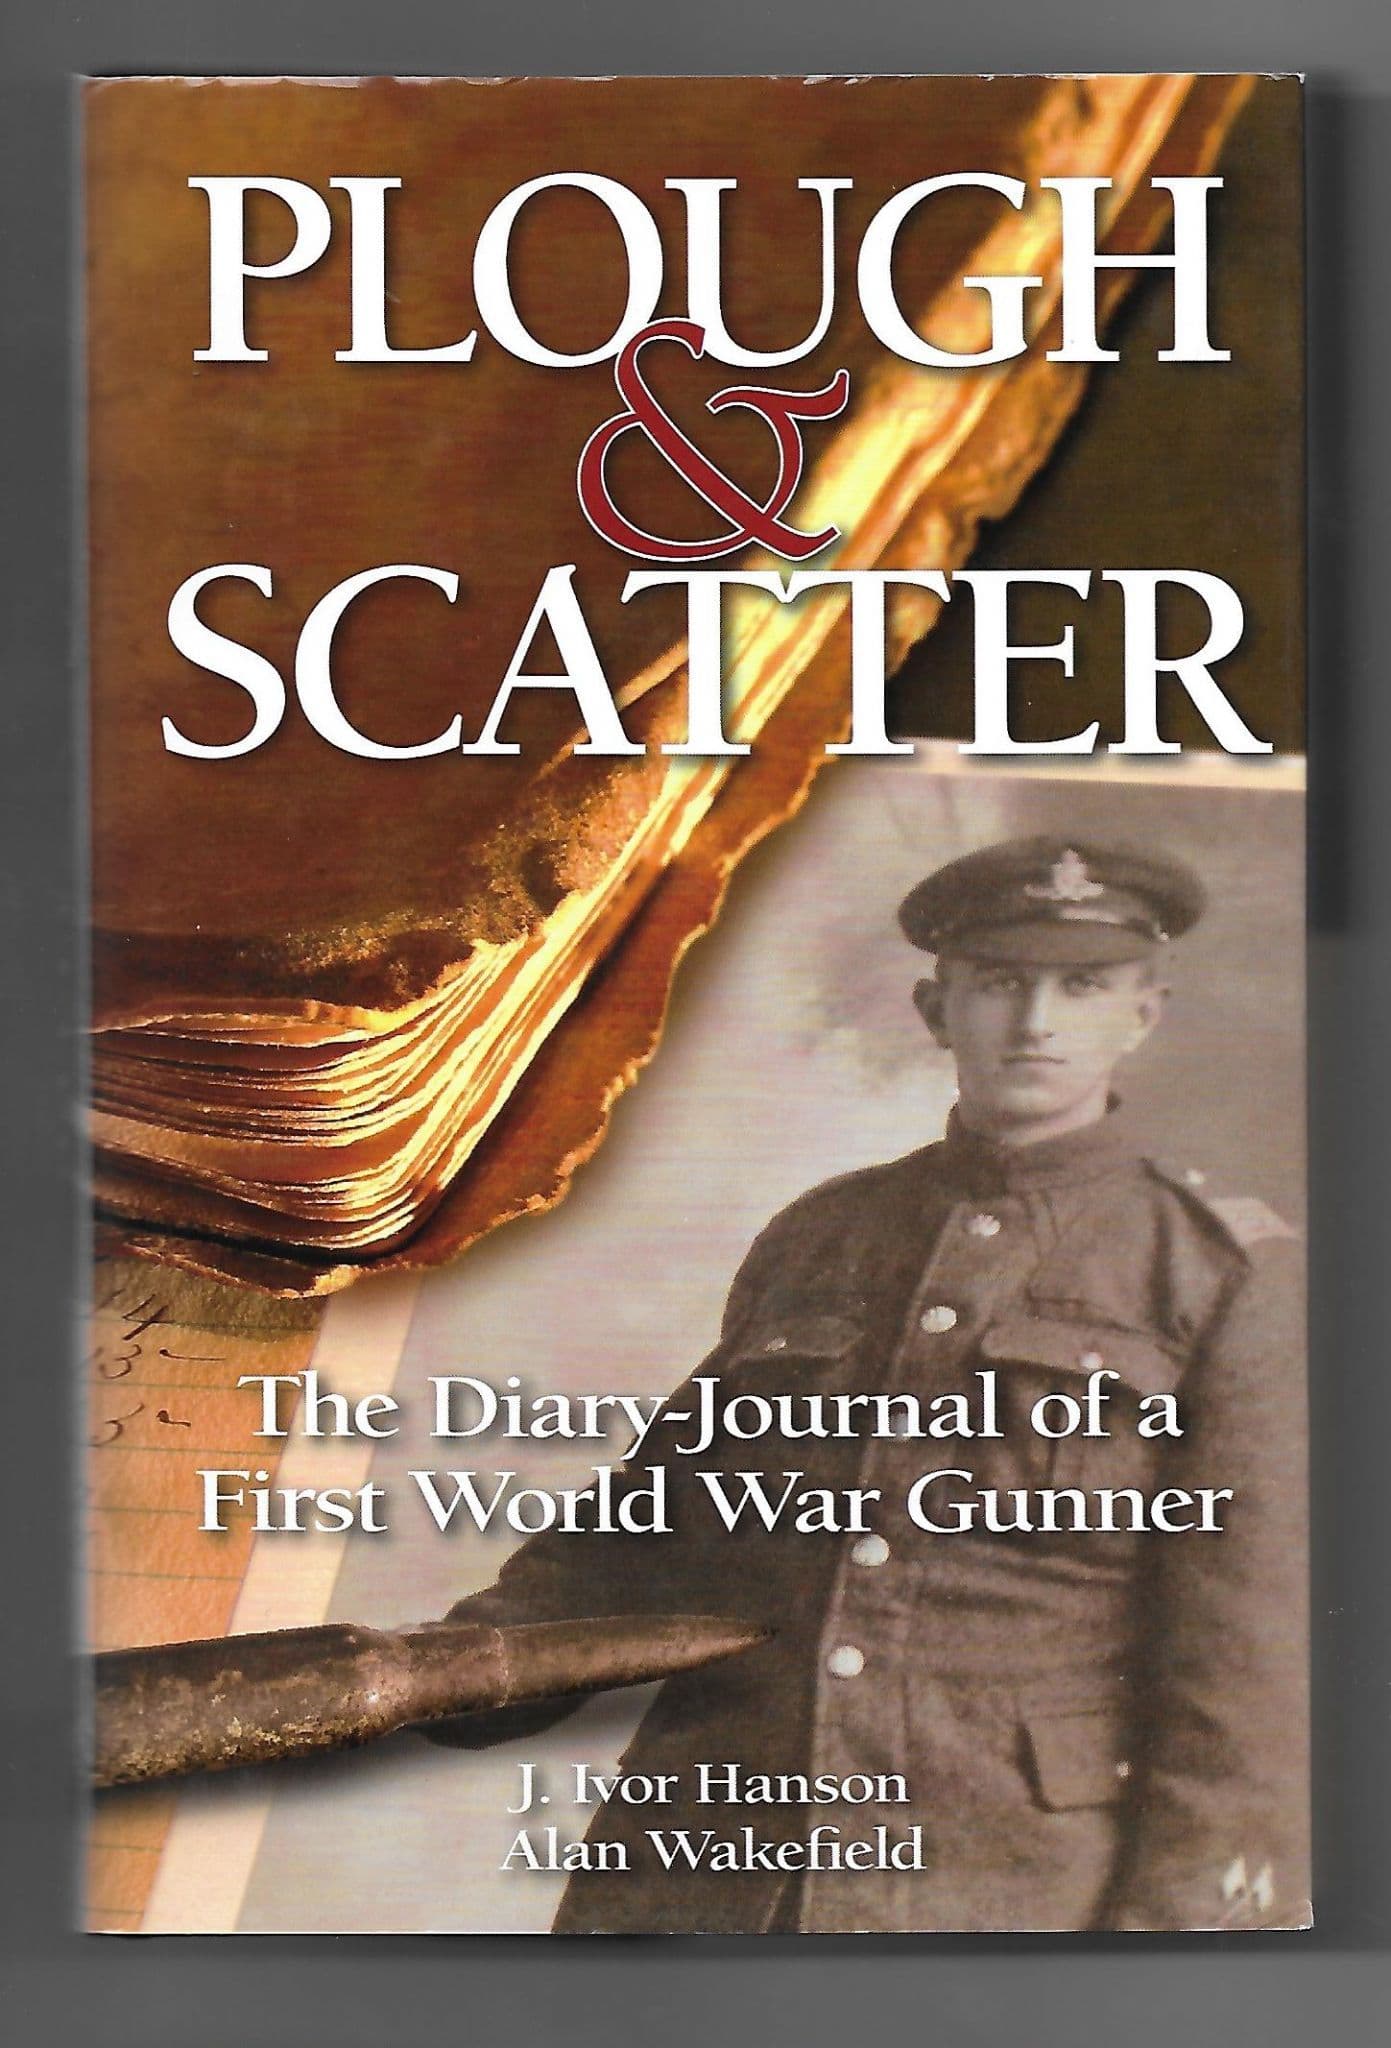 Plough and Scatter: The Diary of a First World War Gunner